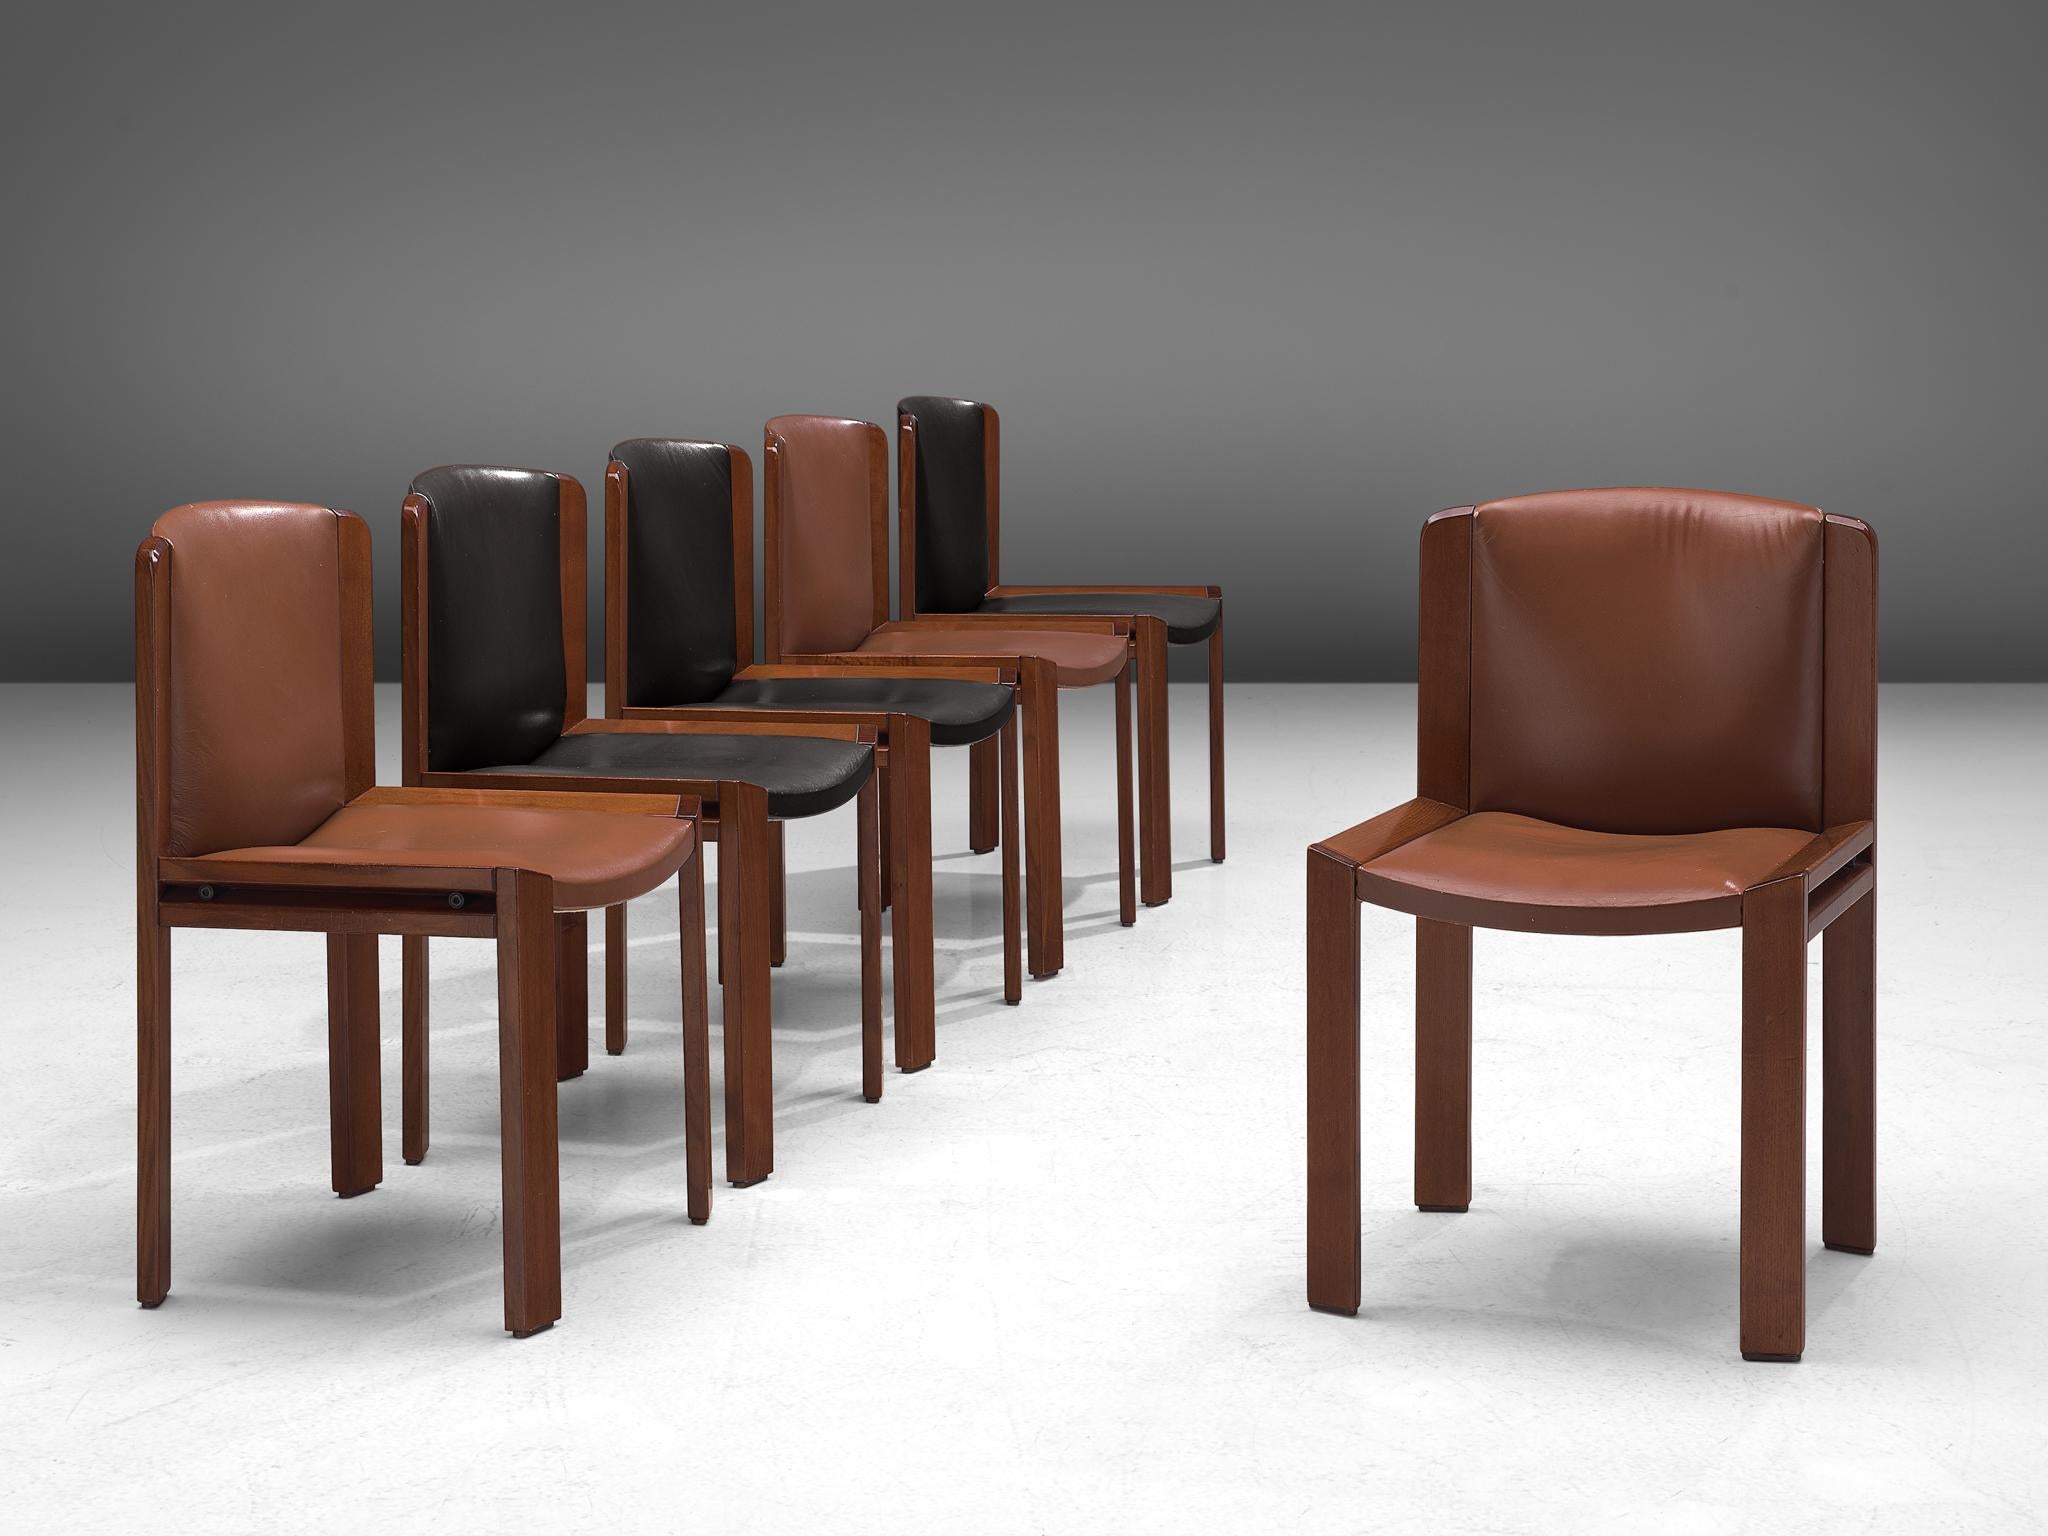  Twelve '300' Dining Chairs in Black and Brown Leather by Joe Colombo 2